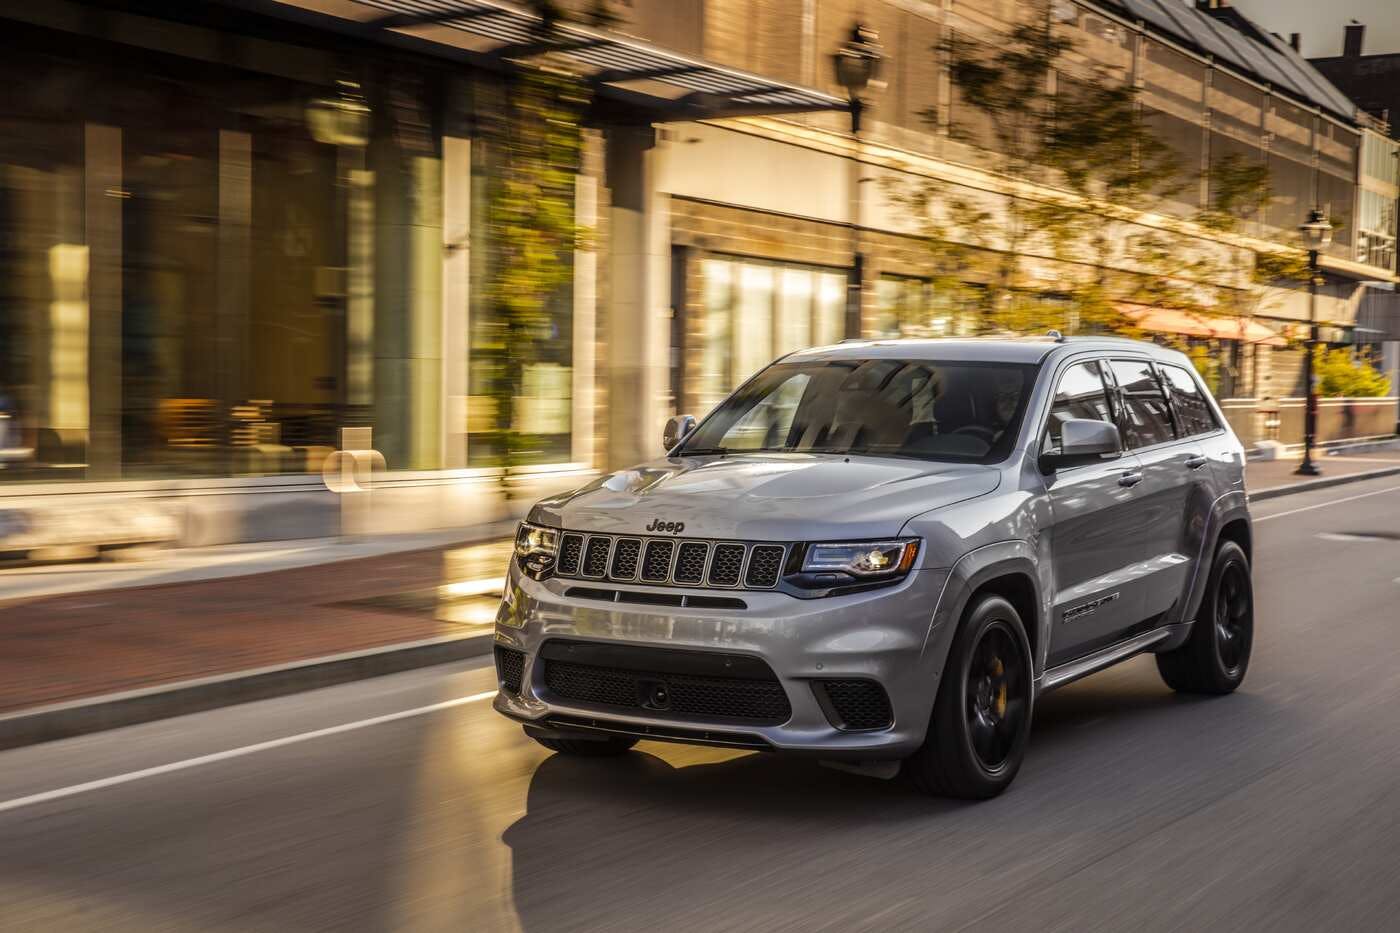 2020 Jeep Grand Cherokee Comparisons Reviews Pictures